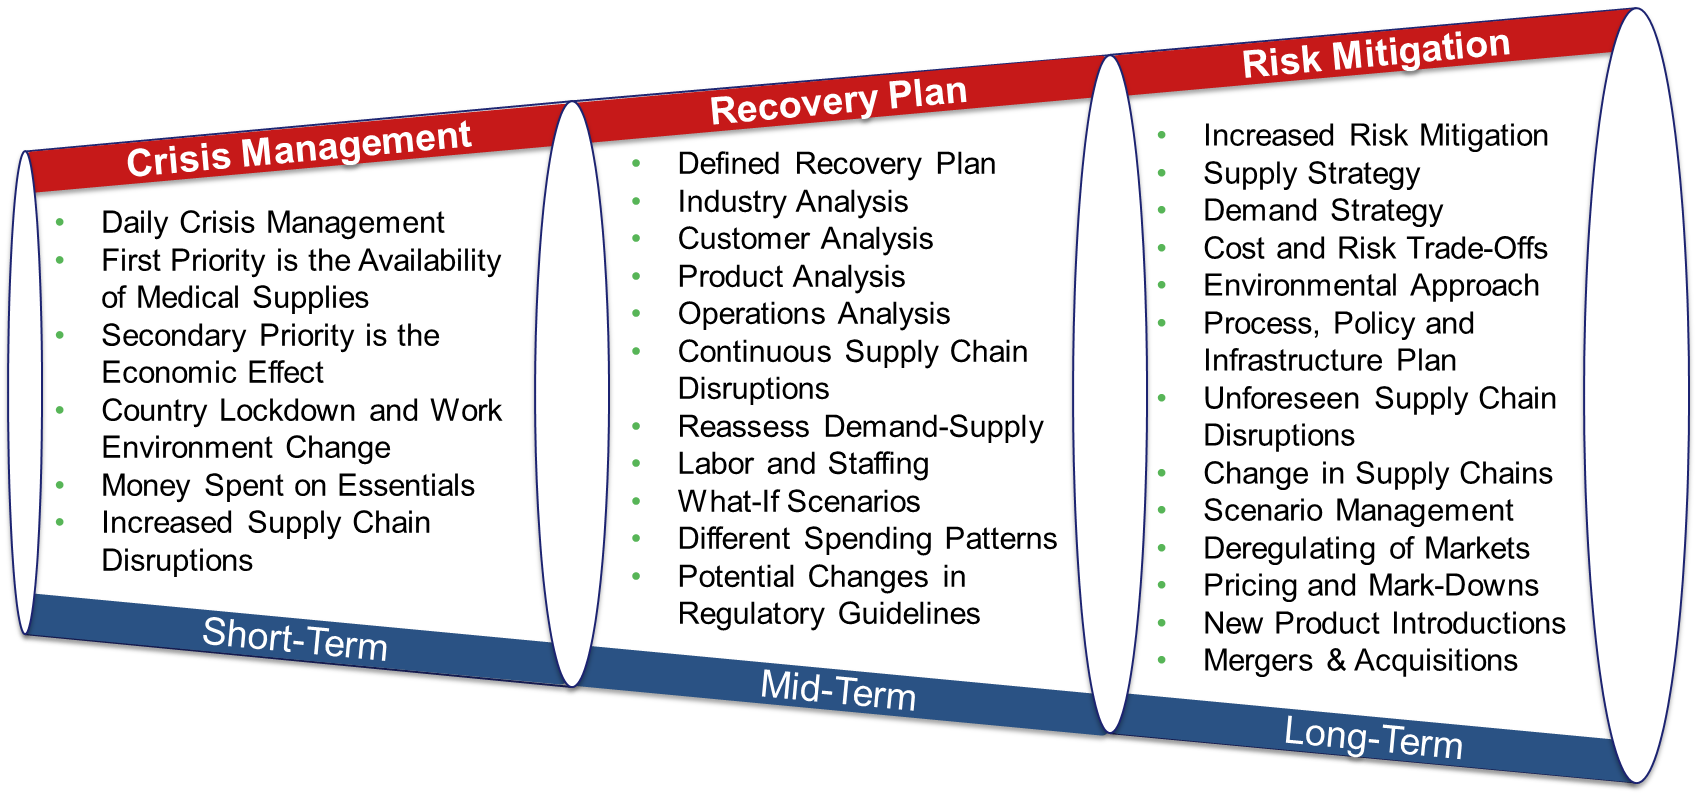 From crisis management to recovery plan to risk mitigation